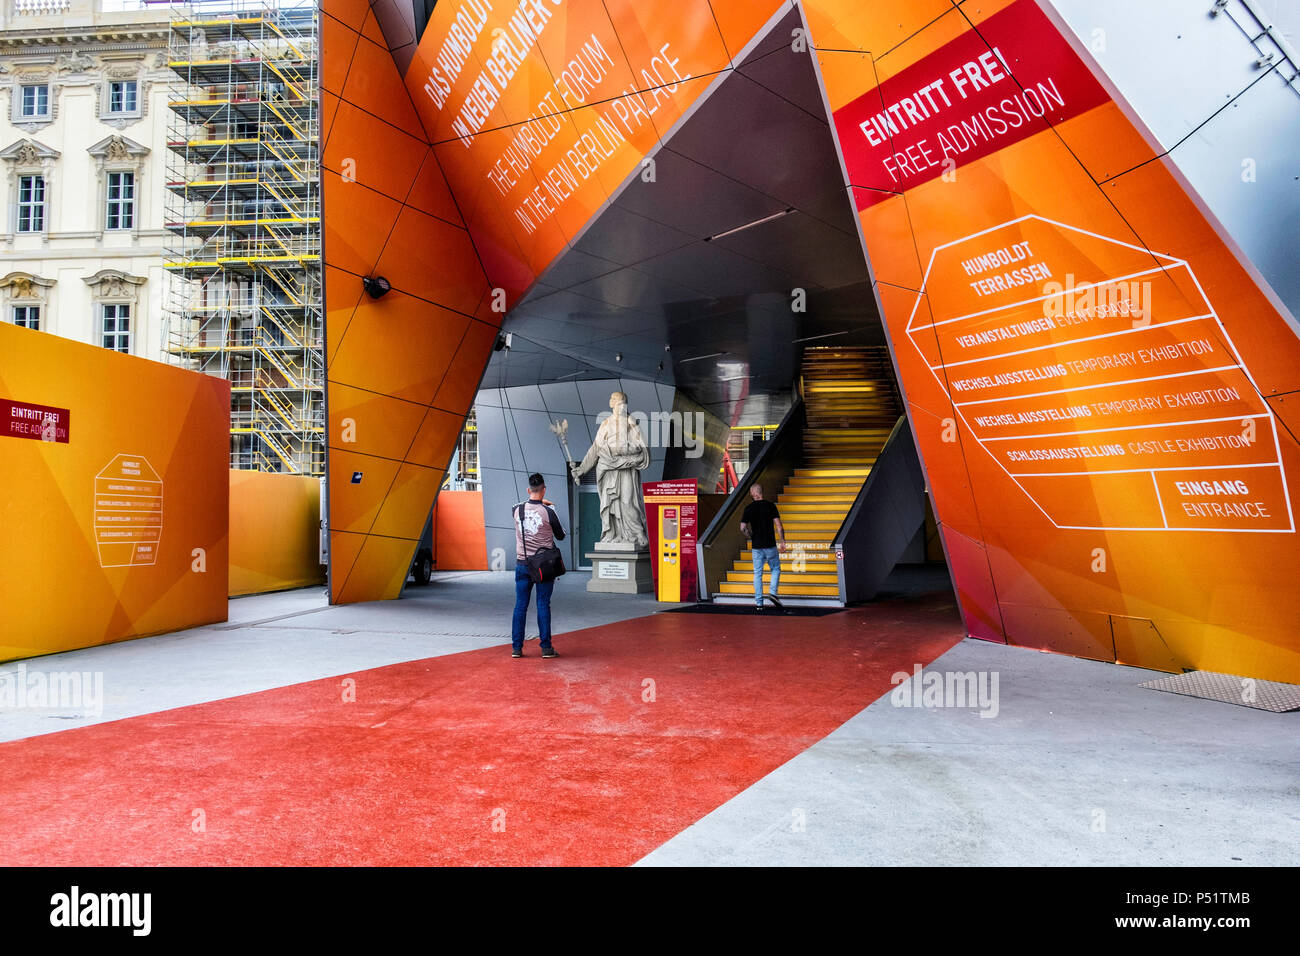 Berlin, Mitte,Schlossplatz. The Humboldt Box infocentre & exhibition space  is a futuristic museum building and viewing platform for the Humboldt Forum  Stock Photo - Alamy